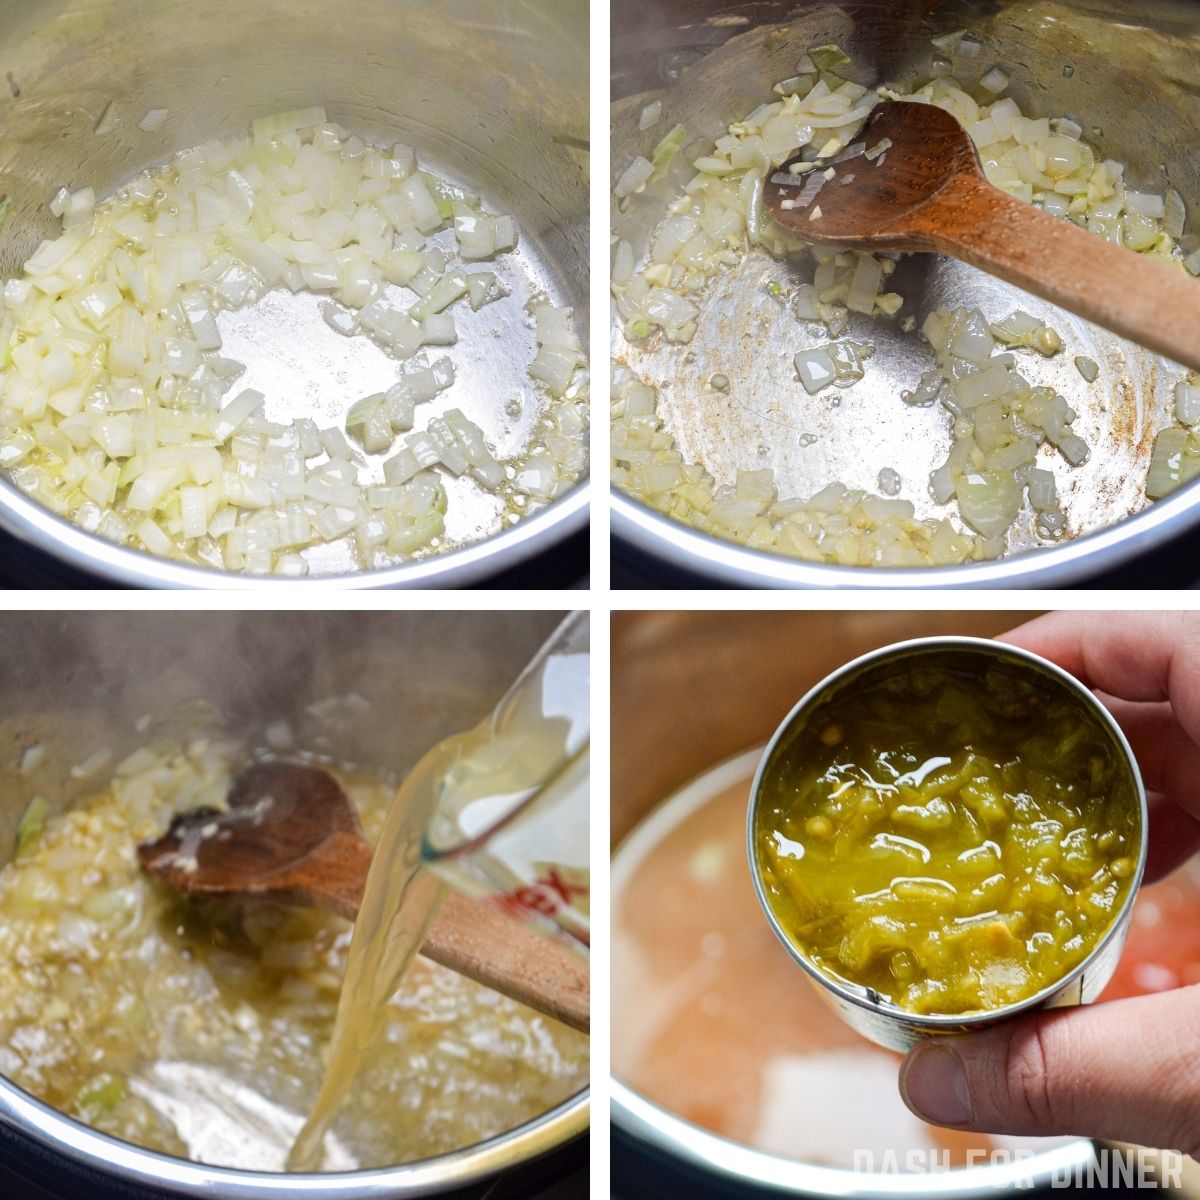 An instant pot insert on saute mode, being used to saute onions and garlic, then adding in broth and green chilies.